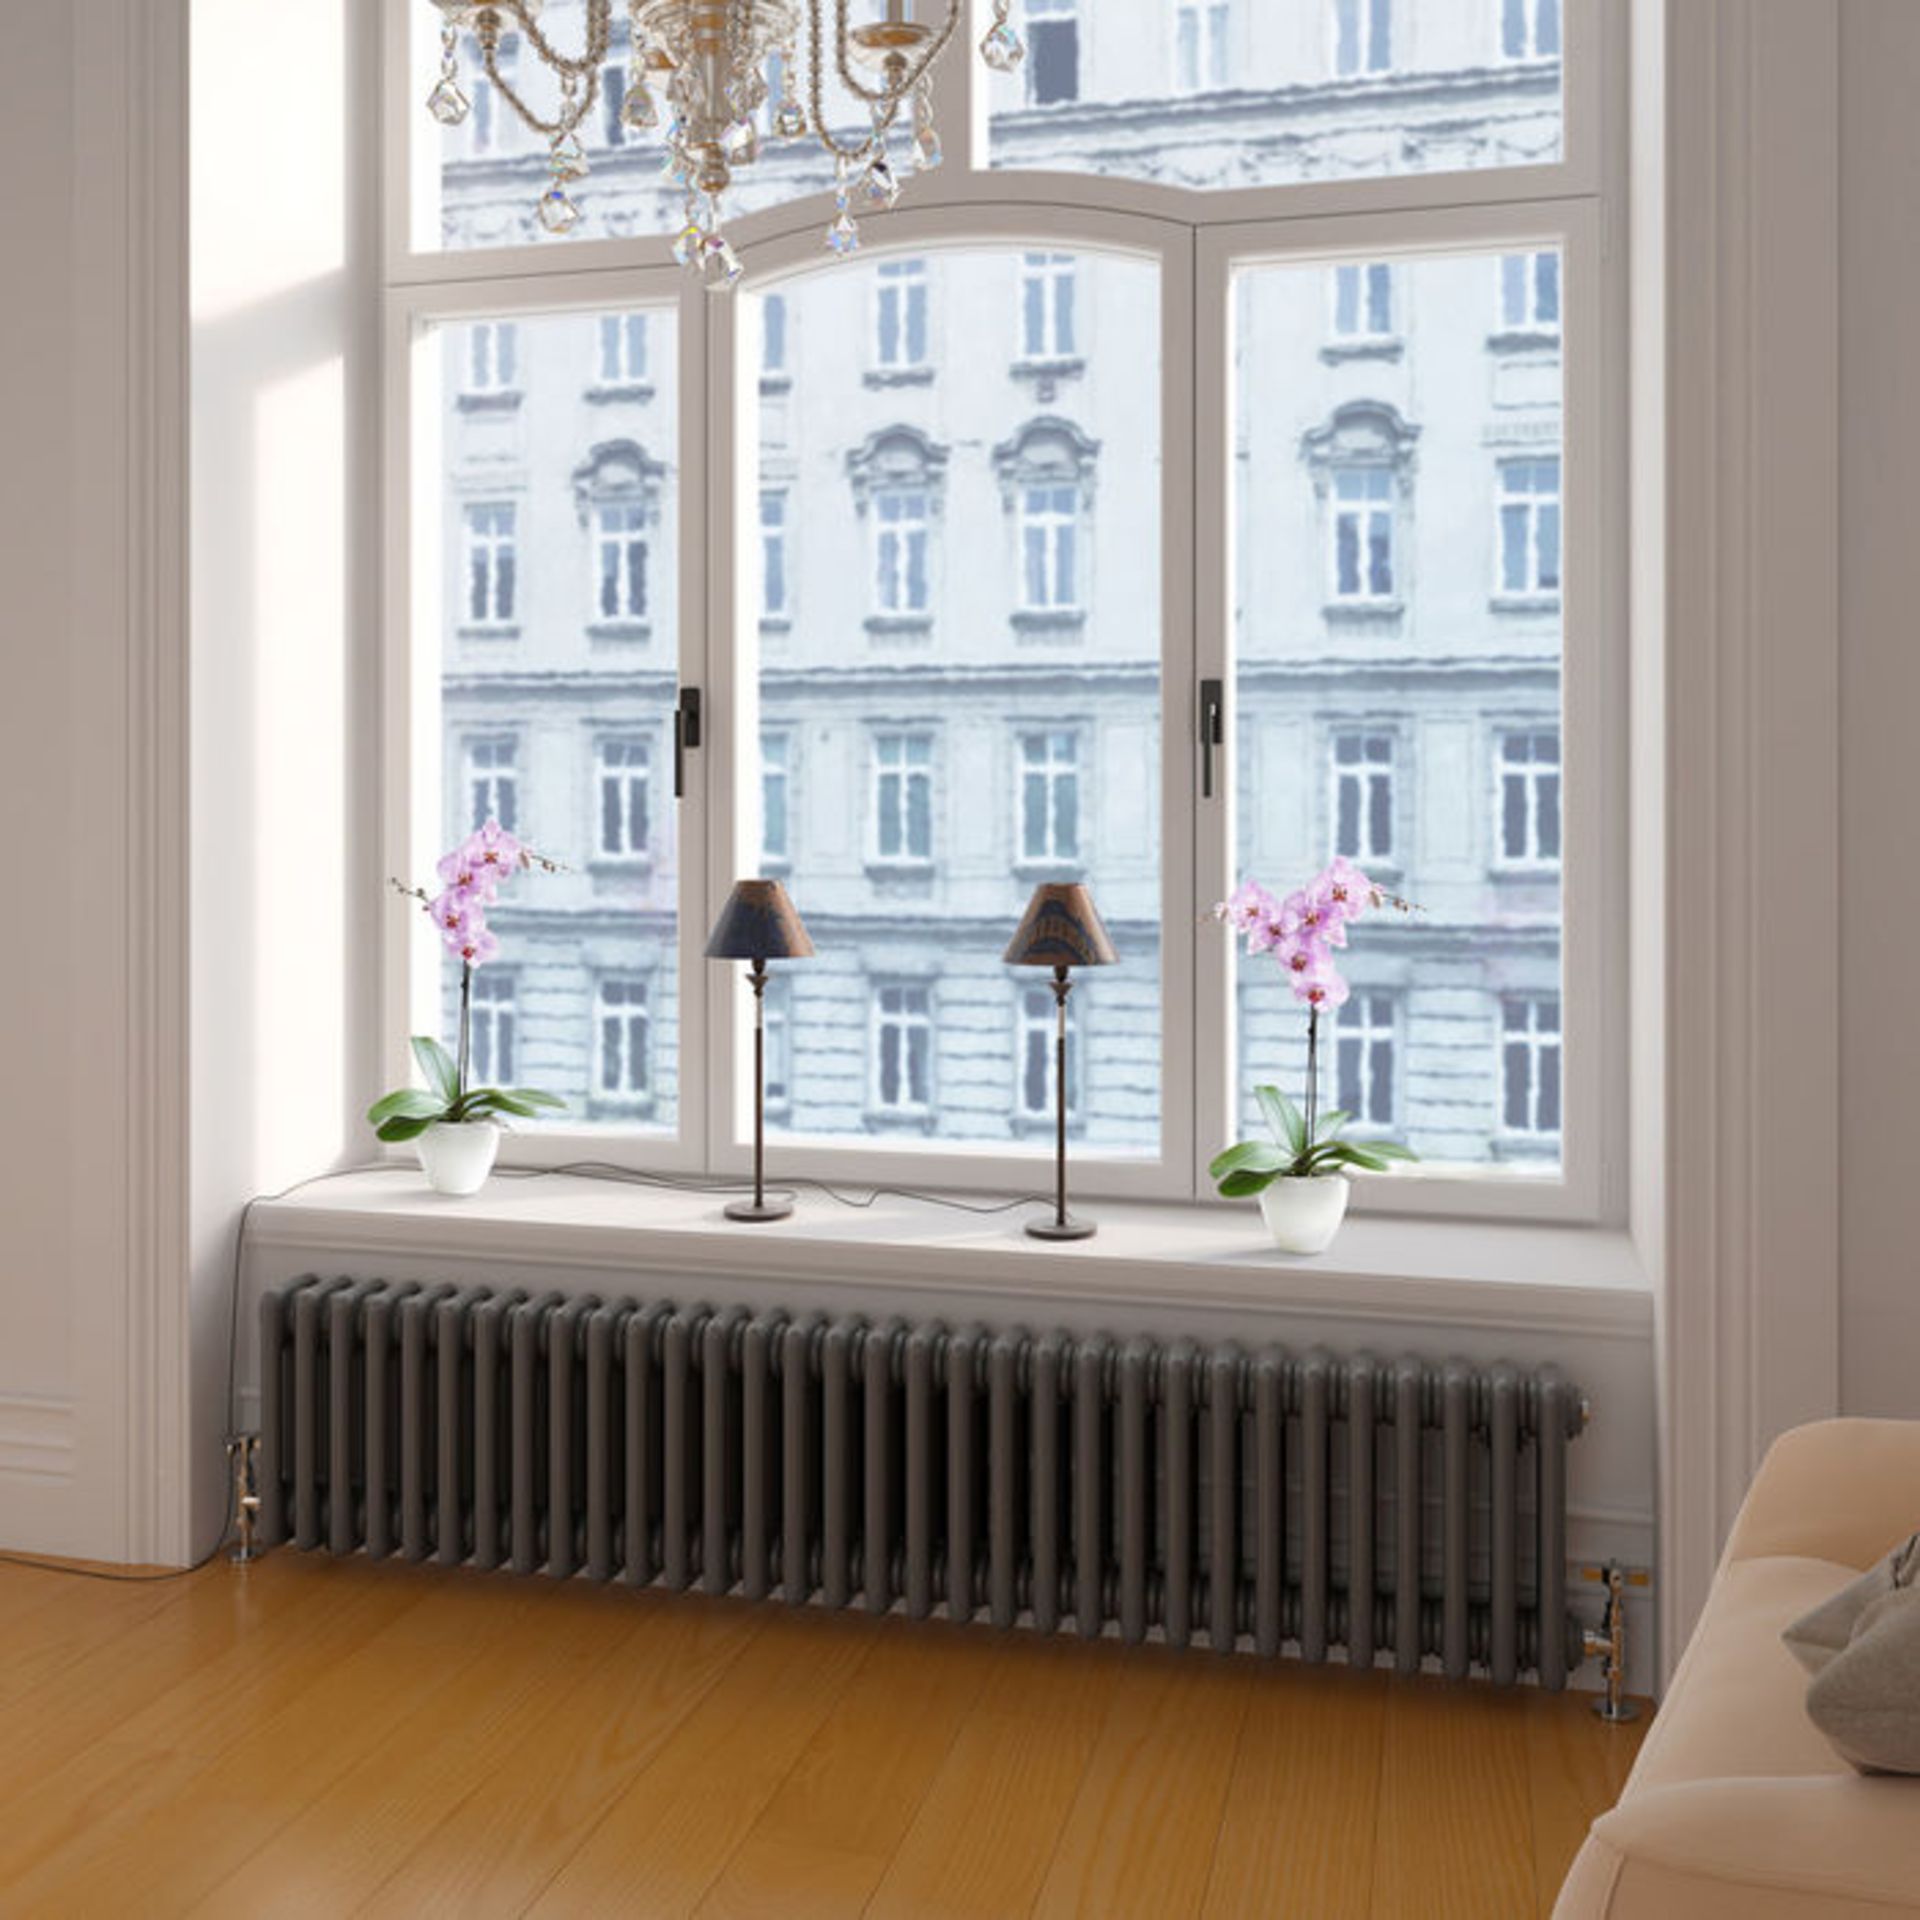 (W155) 300x1458mm Anthracite Triple Panel Horizontal Colosseum Traditional Radiator. RRP £649.99. - Image 2 of 3